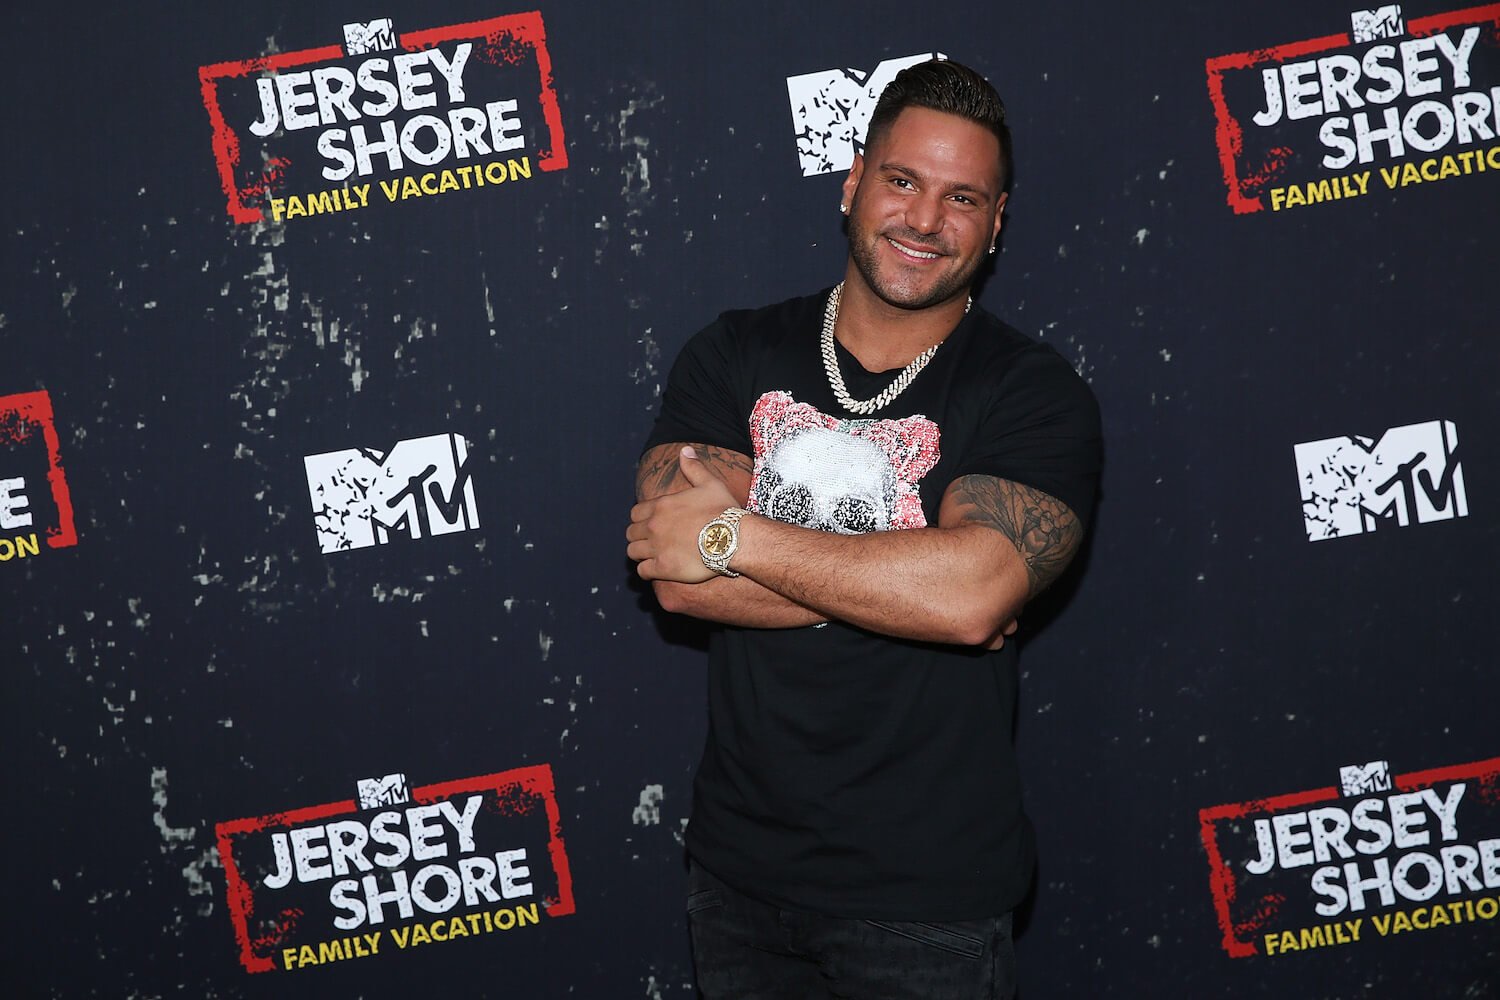 'Jersey Shore: Family Vacation' star Ronnie Ortiz-Magro standing and smiling at a 'Jersey Shore' event